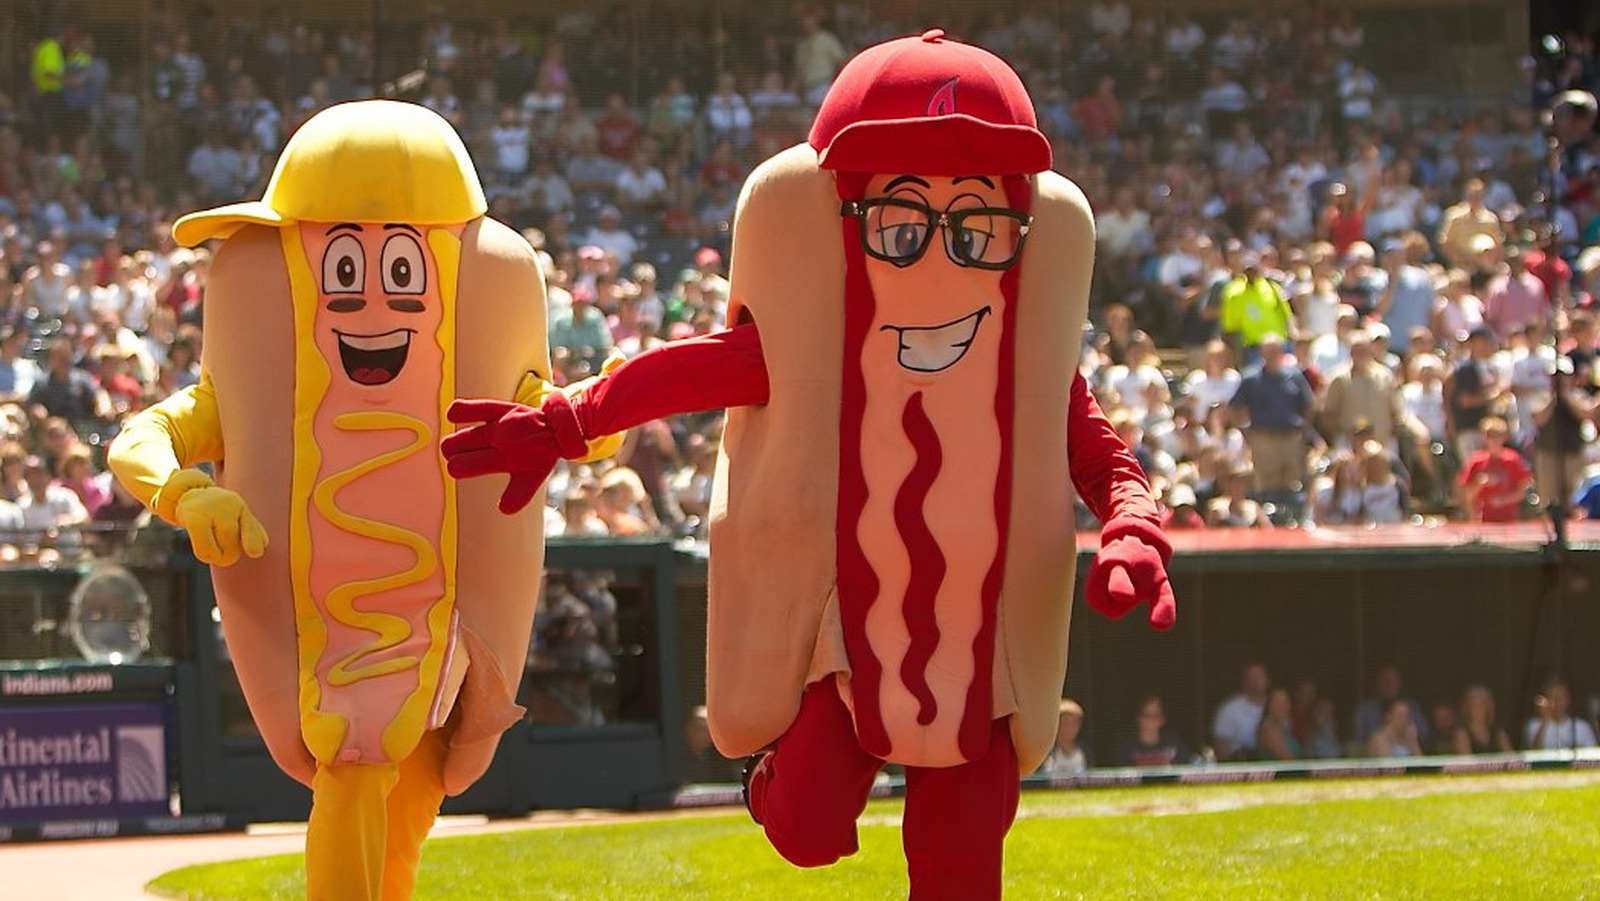 PETA Is Calling For A Big Change To Cleveland's Hot Dog Mascot Race